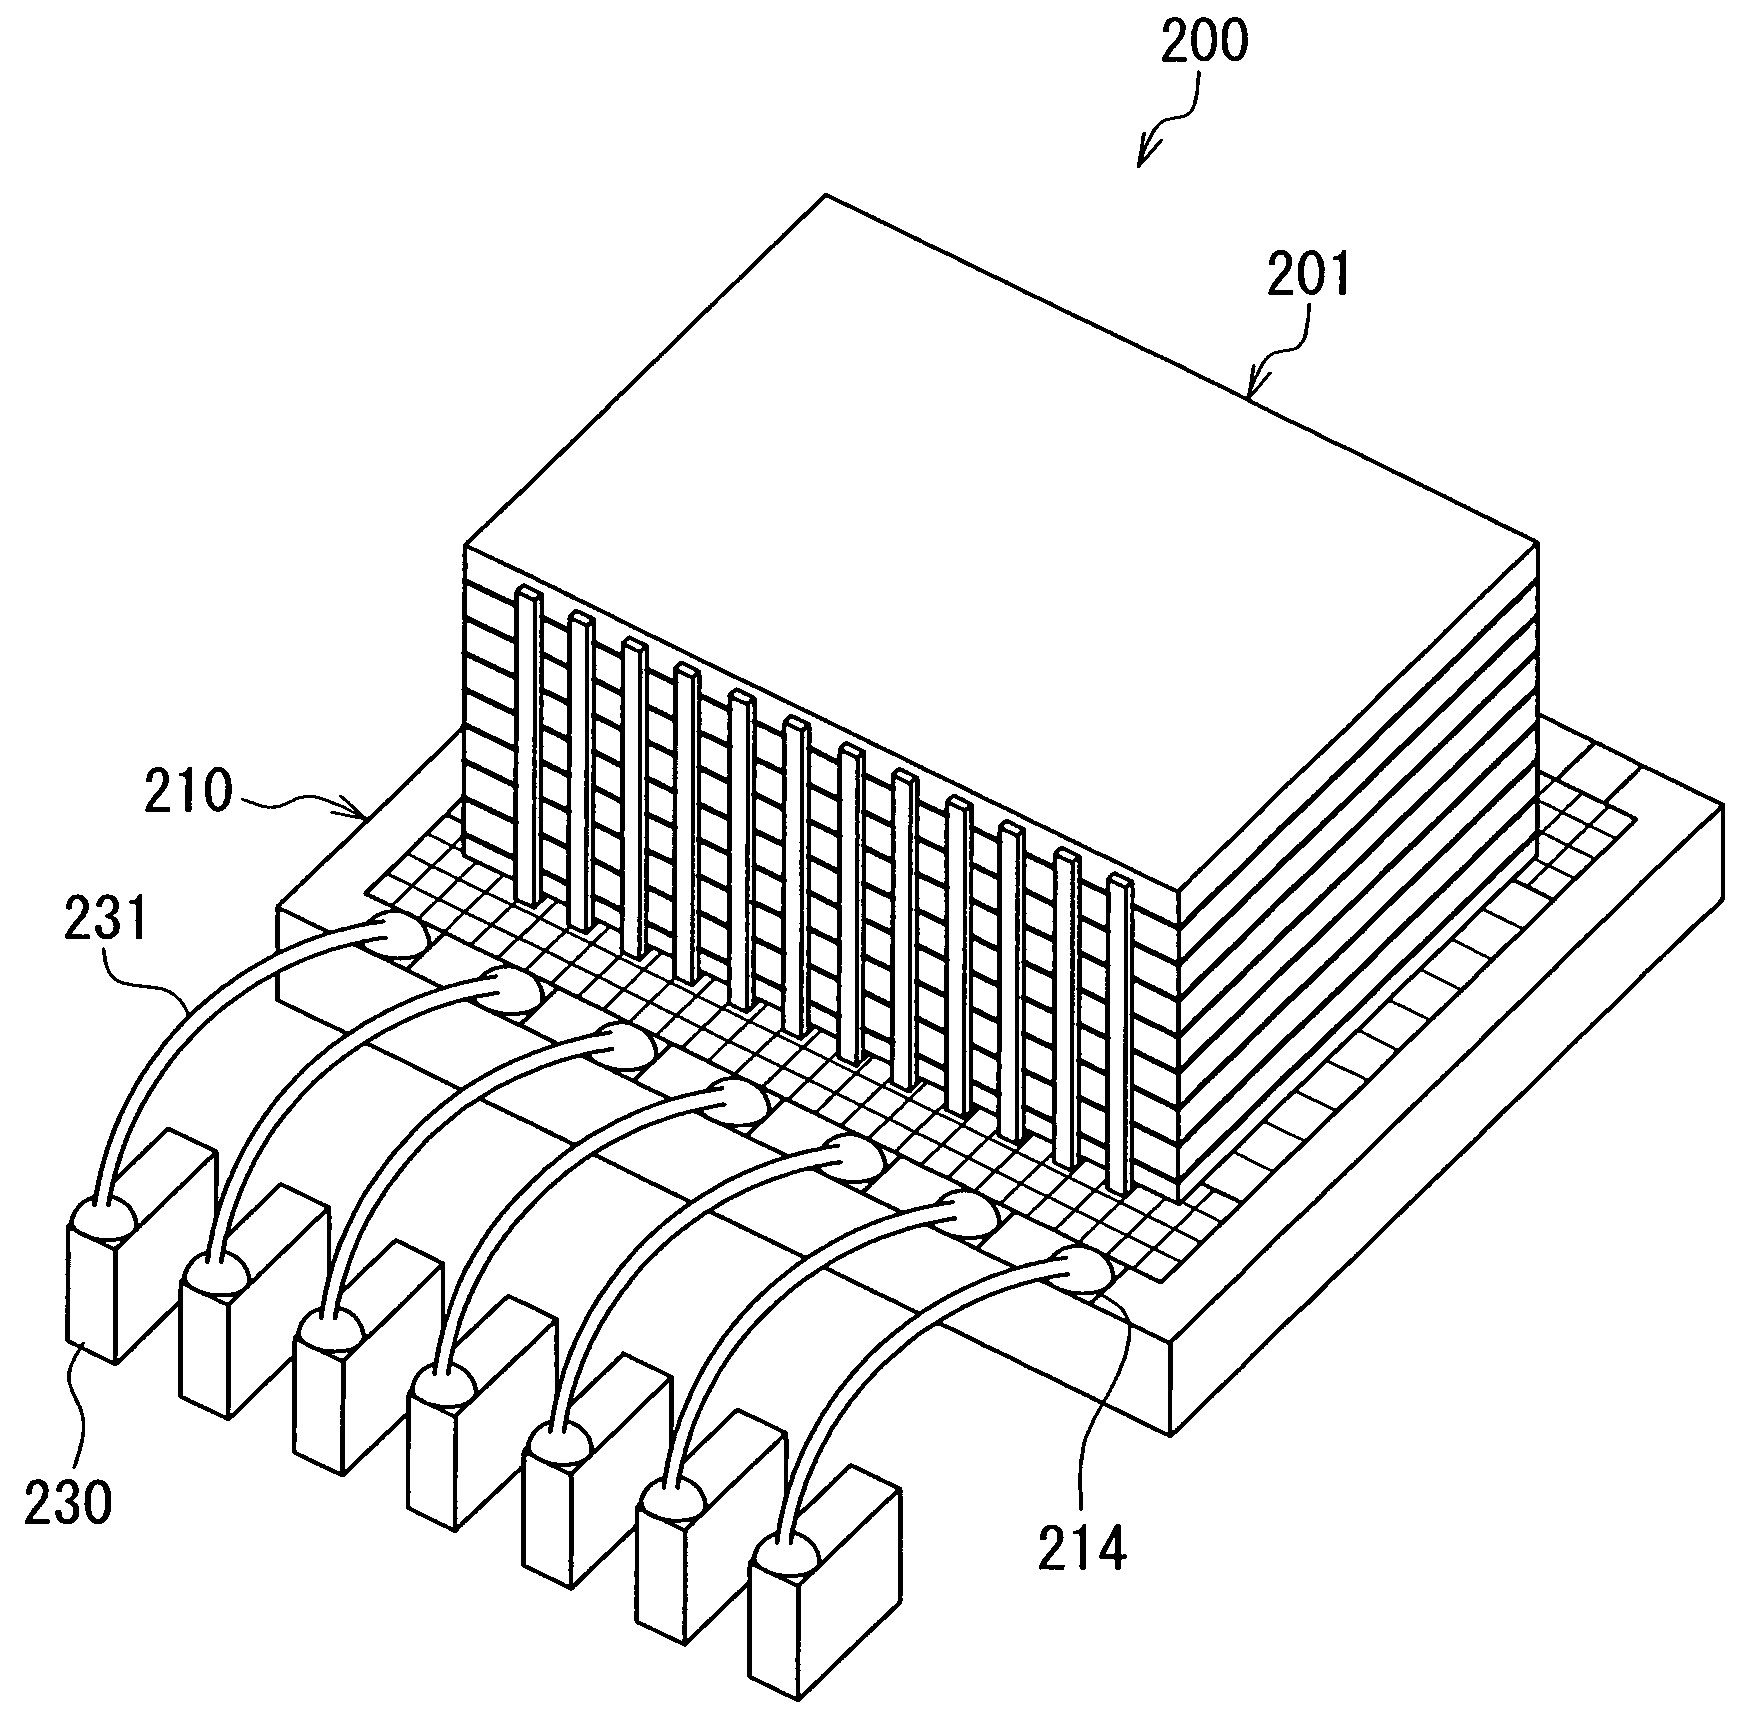 Layered chip package that implements memory device